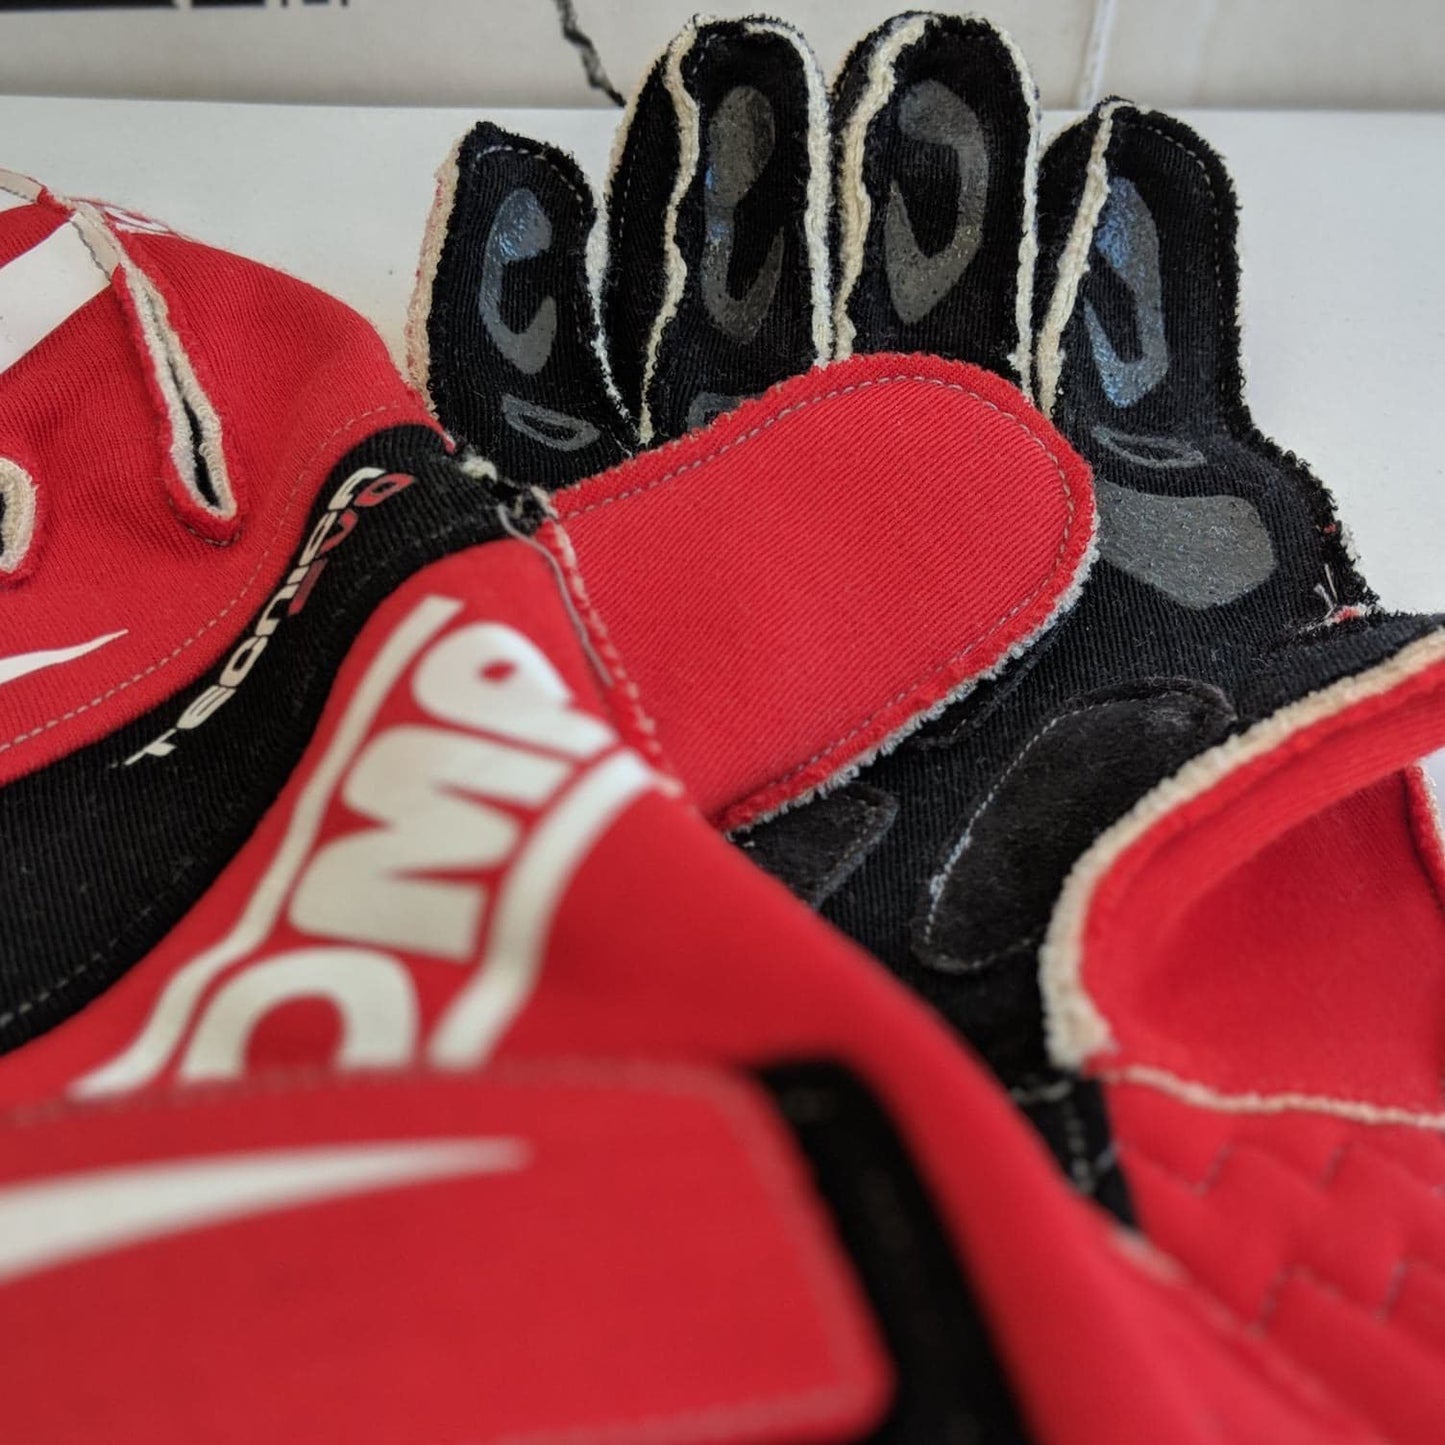 OMP Racing Tecnica Evo Driving Gloves – We Don't Lift Racing